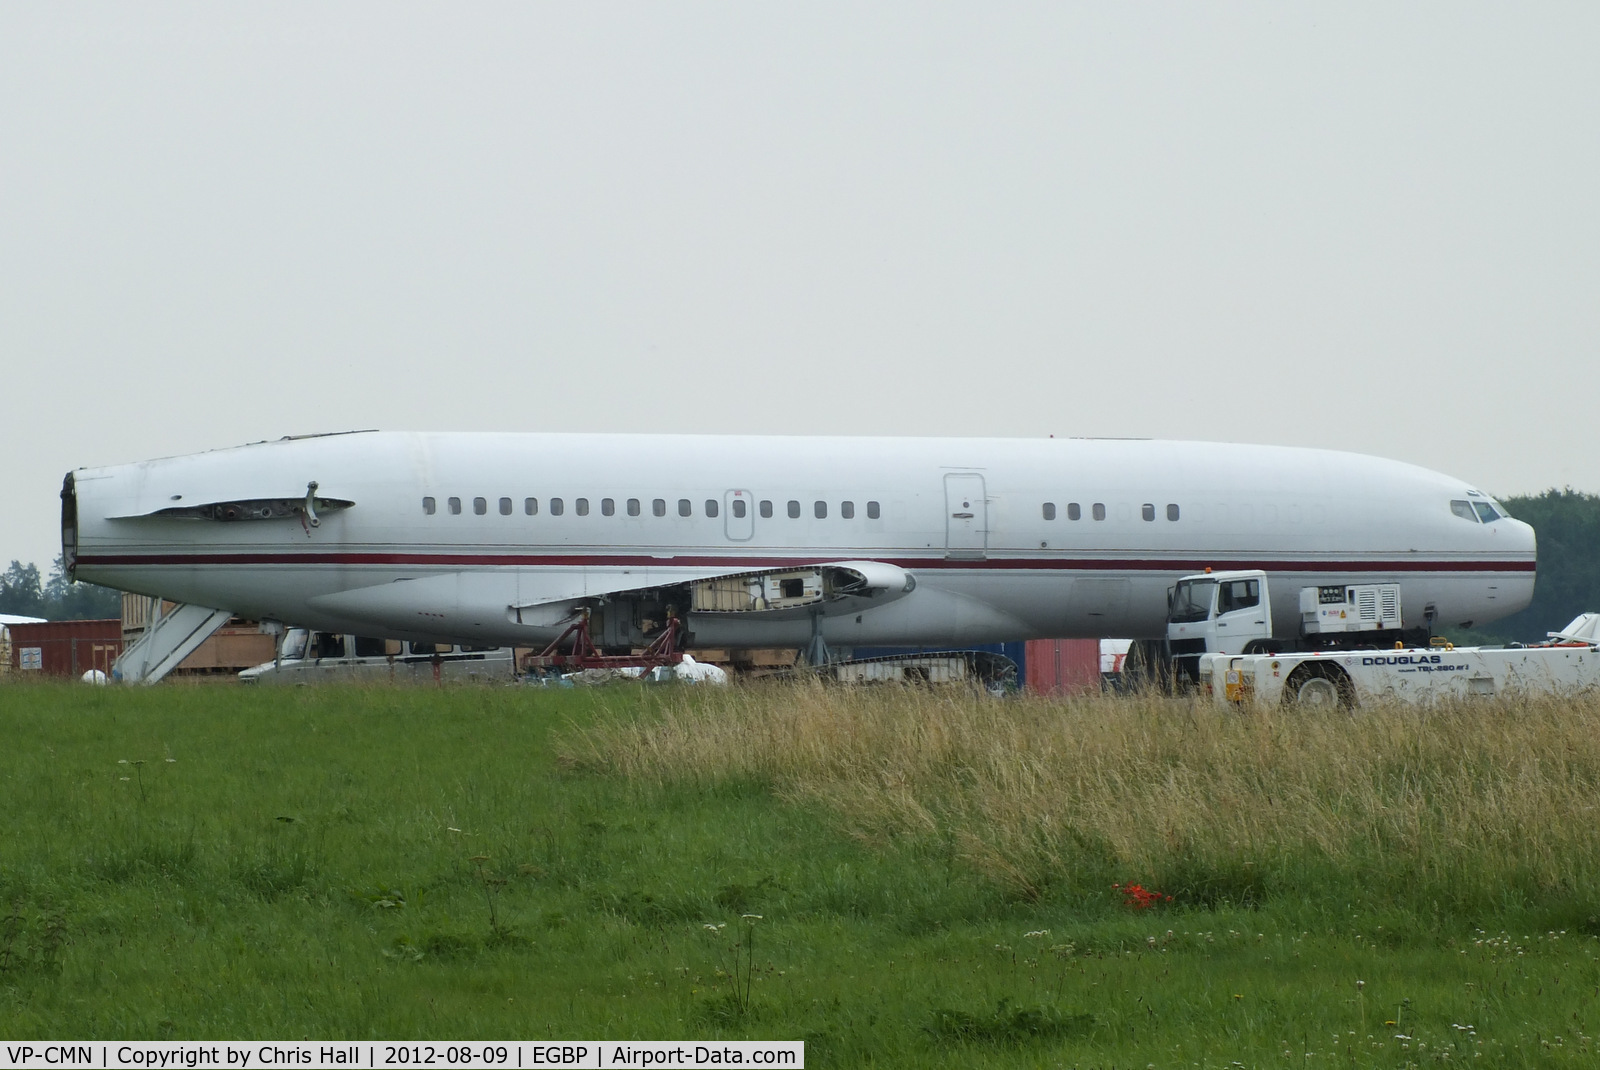 VP-CMN, 1967 Boeing 727-46 C/N 19282, in the scrapping area at Kemble